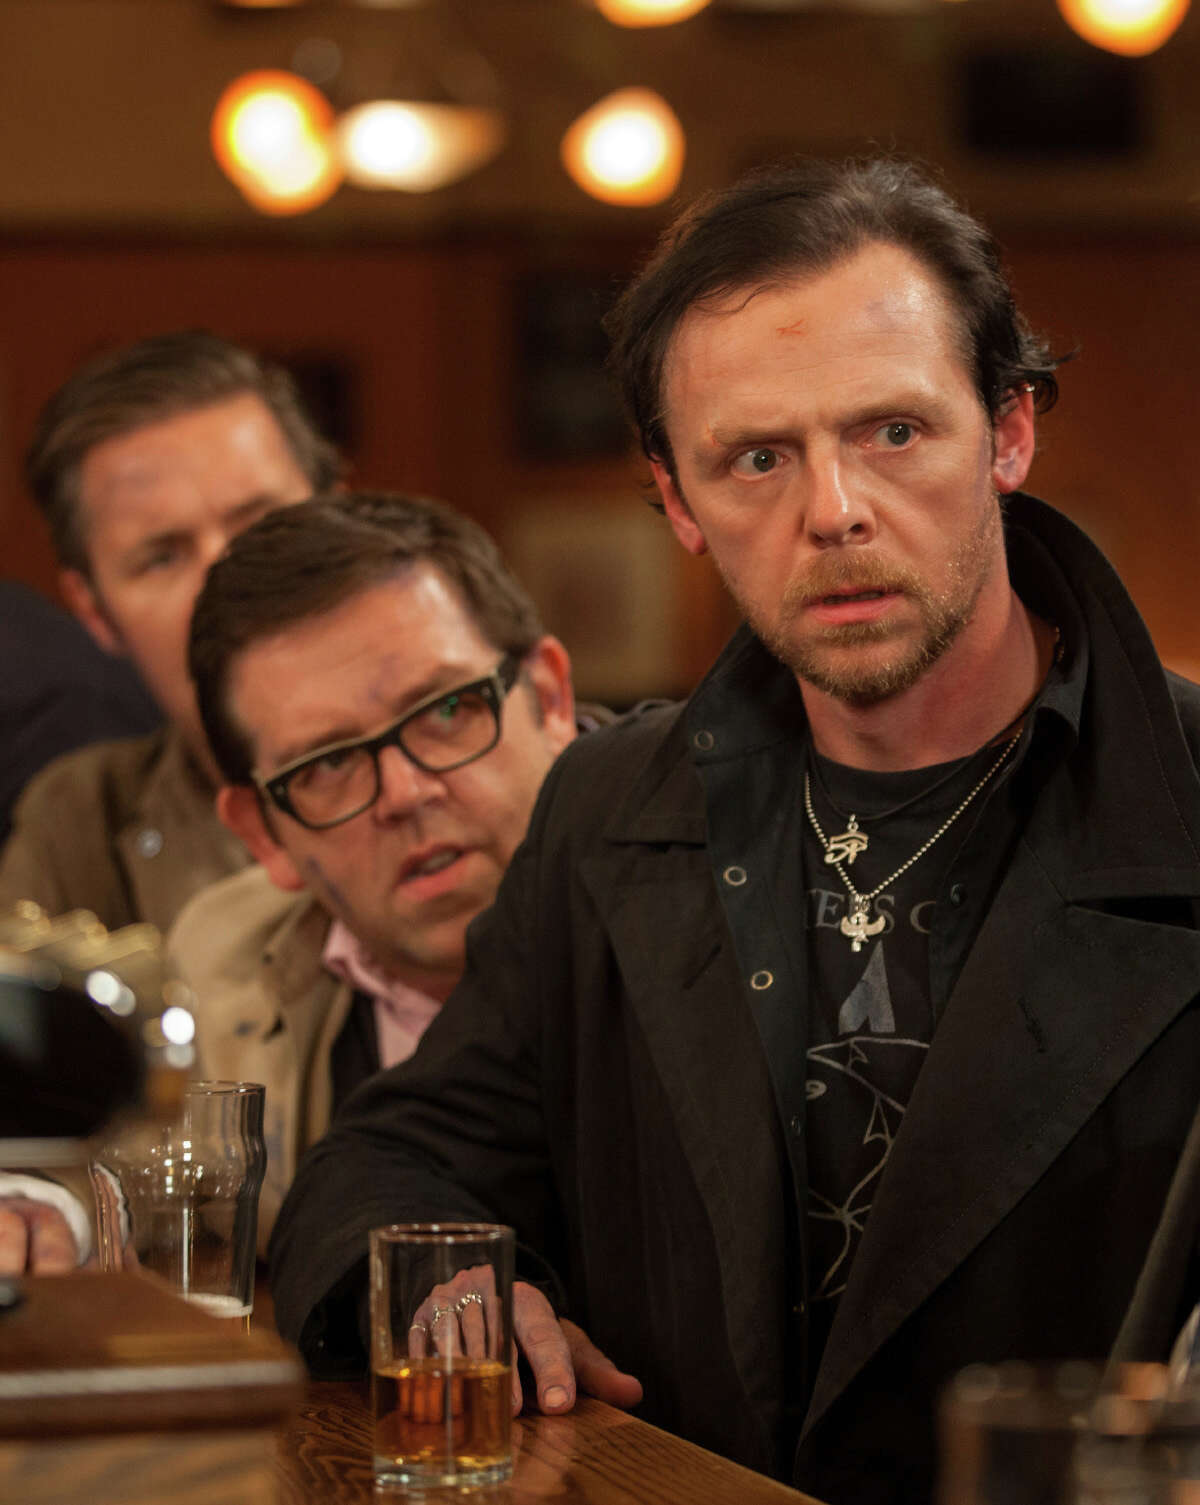 This film publicity image released by Focus Features shows Simon Pegg, right, and Nick Frost in a scene from "The World's End." (AP Photo/Focus Features, Laurie Sparham)